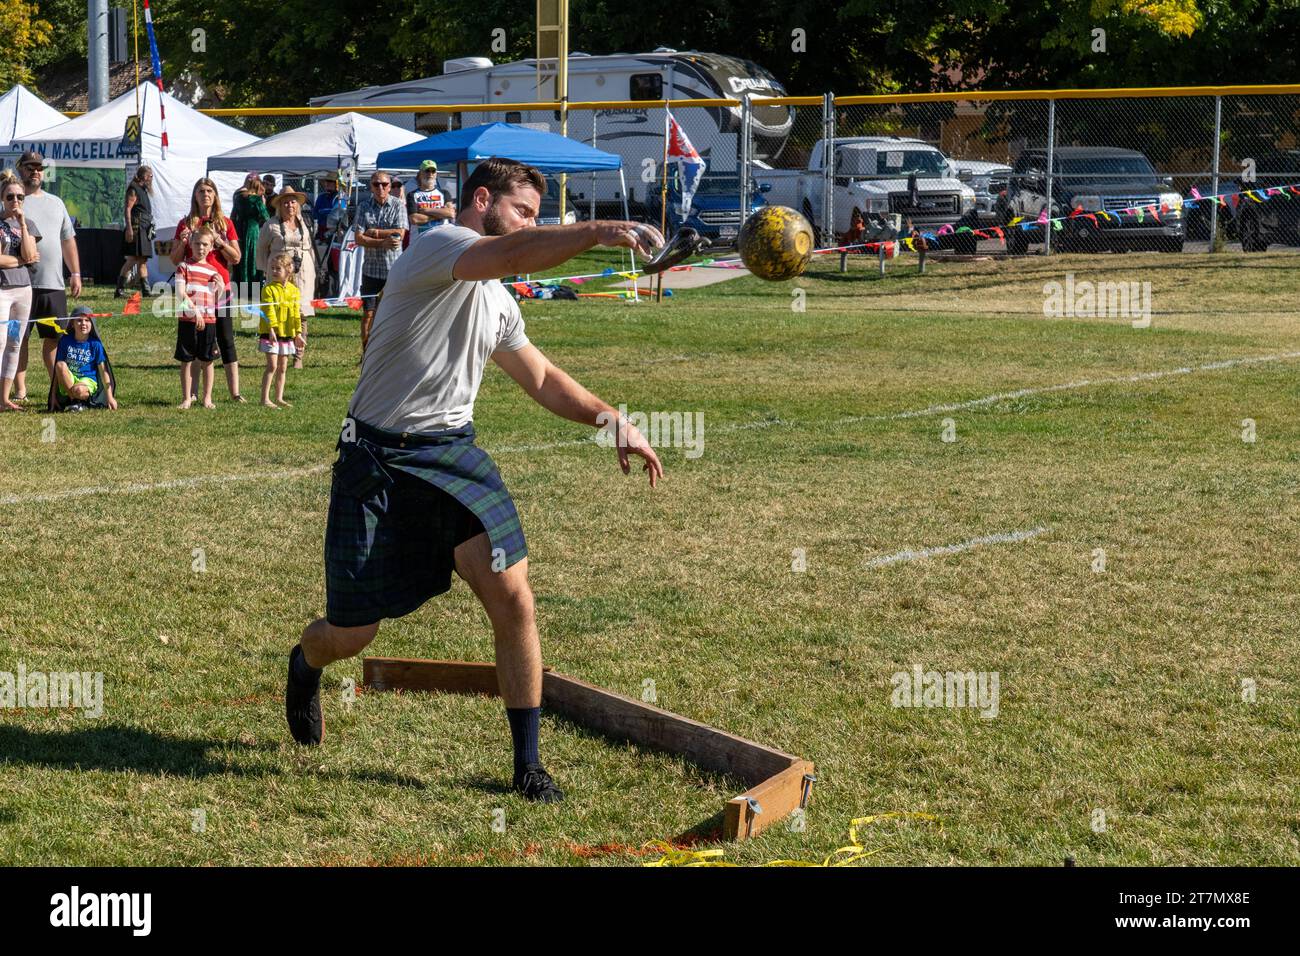 A competitor in a kilt throws the ball in the Highland games weight throw at the Moab Celtic Festival, Scots on the Rocks, in Moab, Utah.  The steel b Stock Photo